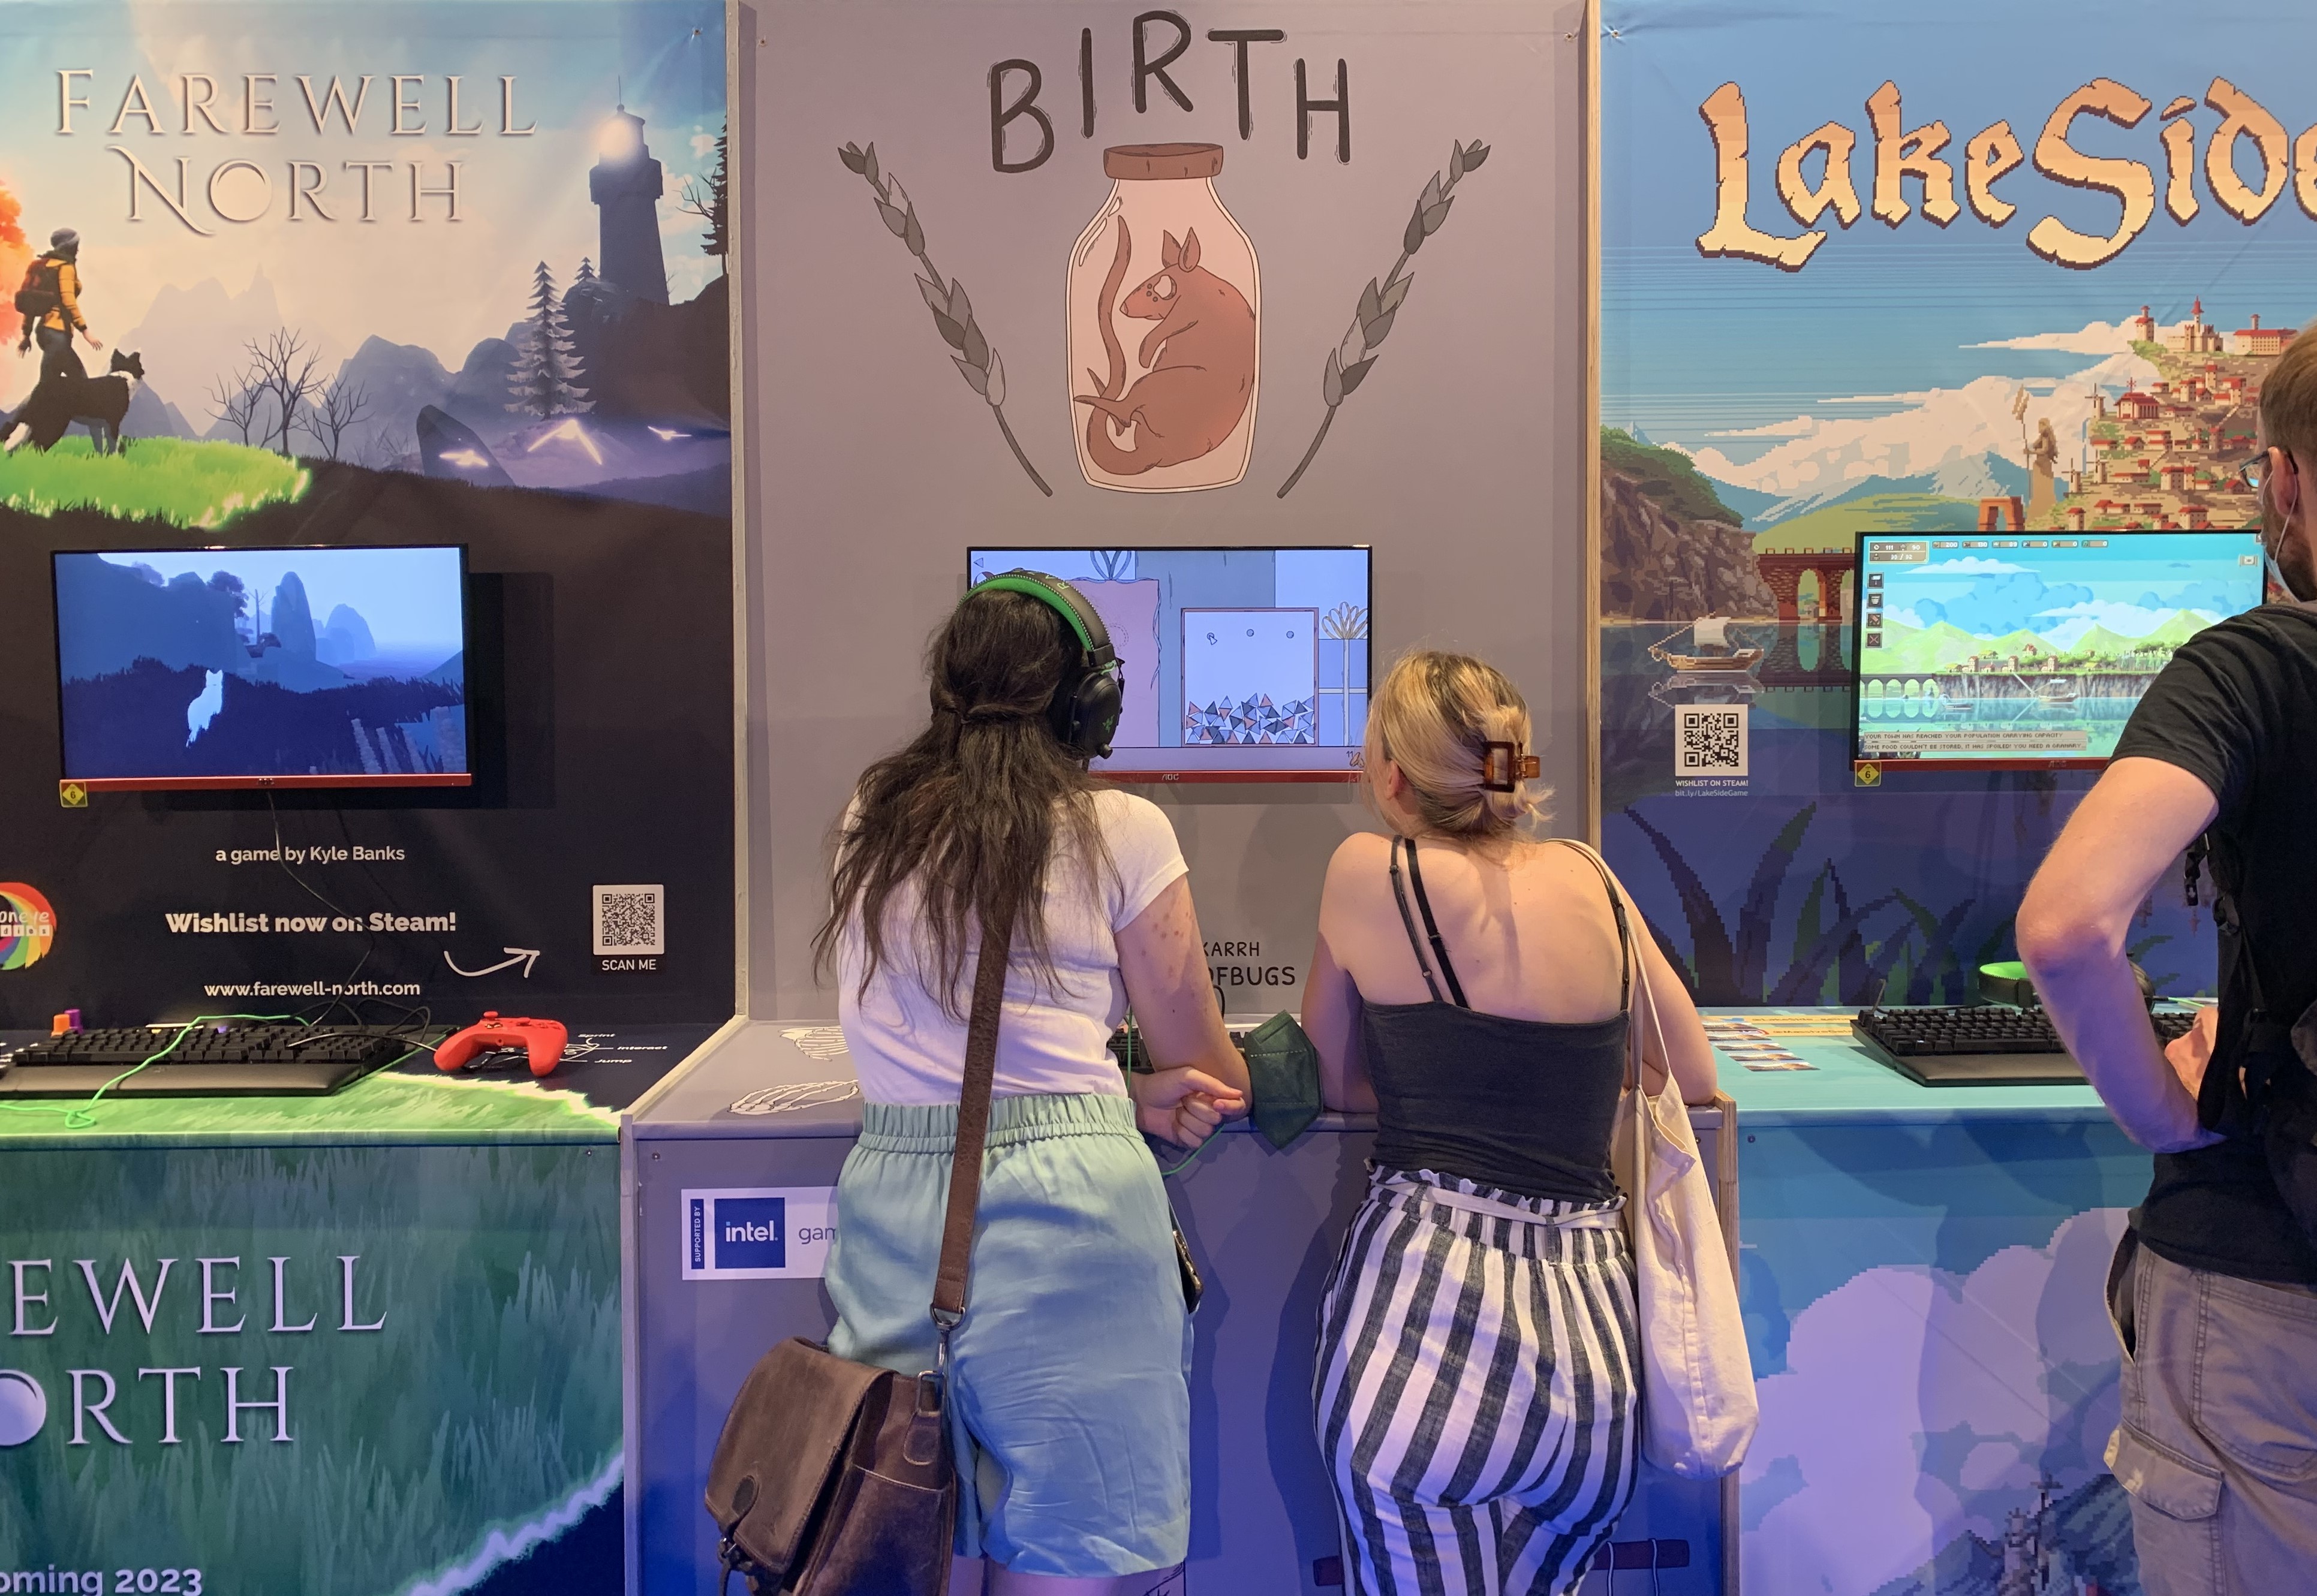 ‘Birth’ is the macabre indie game quietly crushing the convention circuit